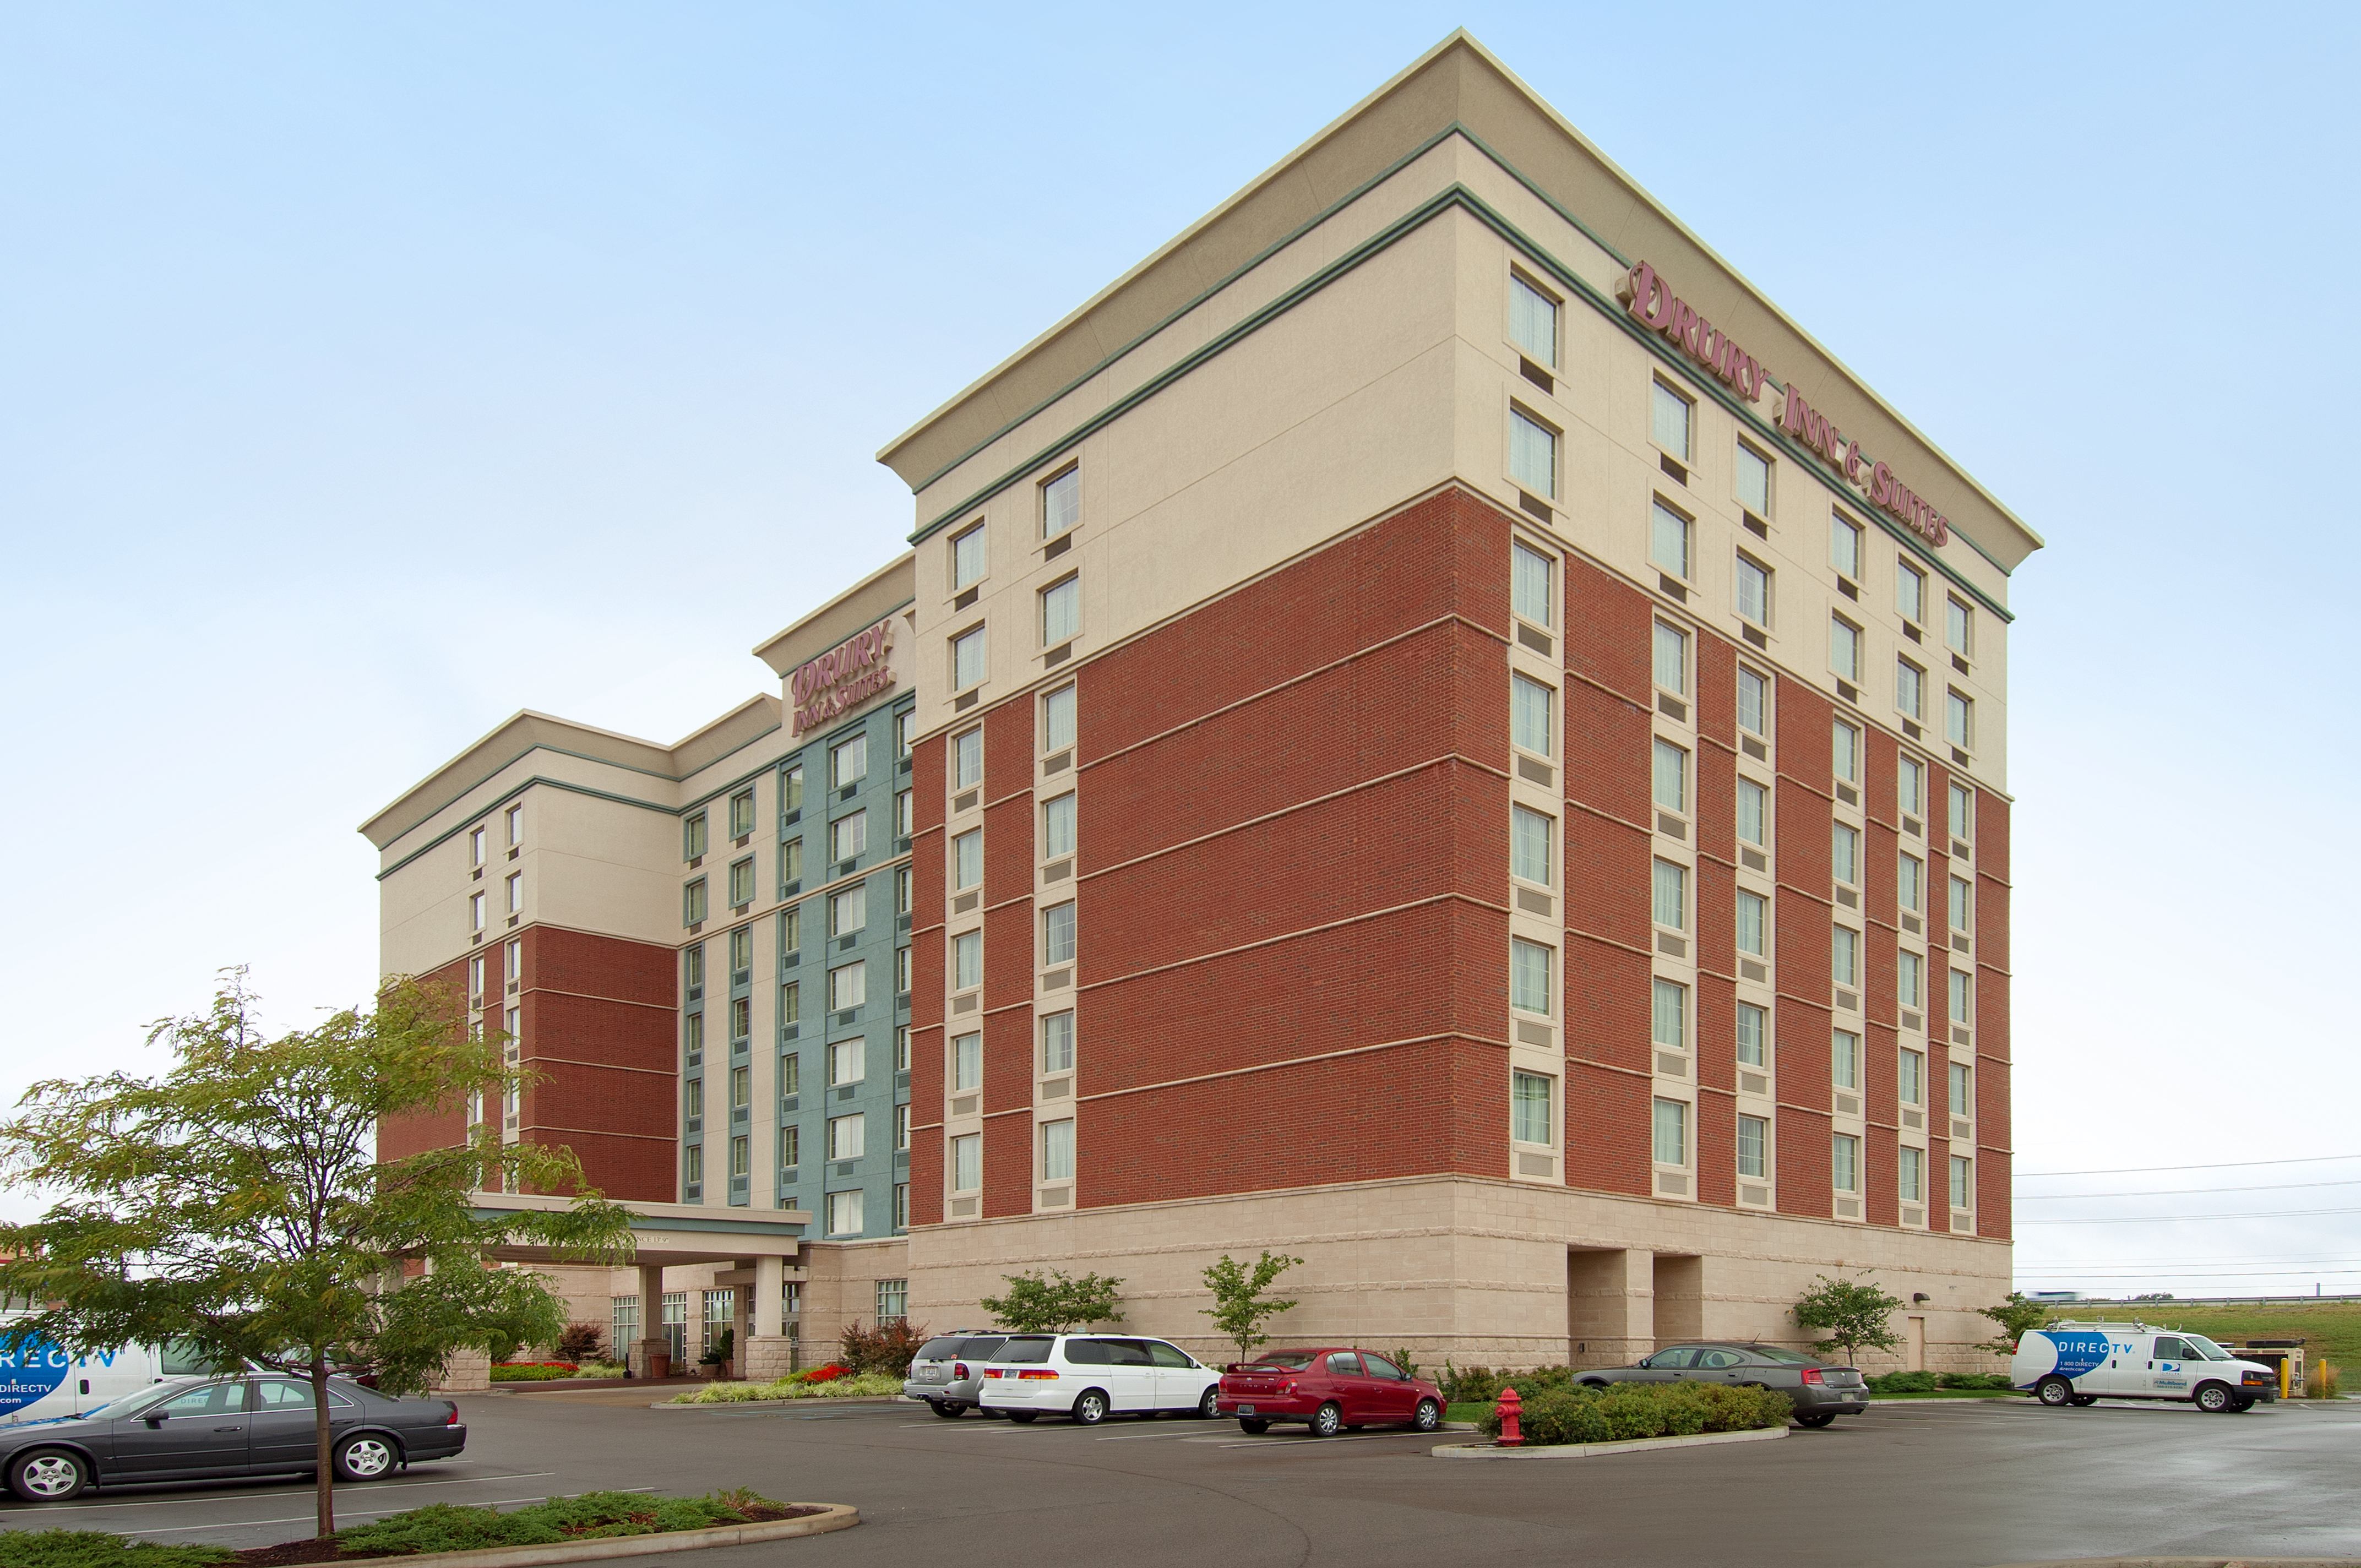 The 10 best hotels near Keystone Mall in Indianapolis, United